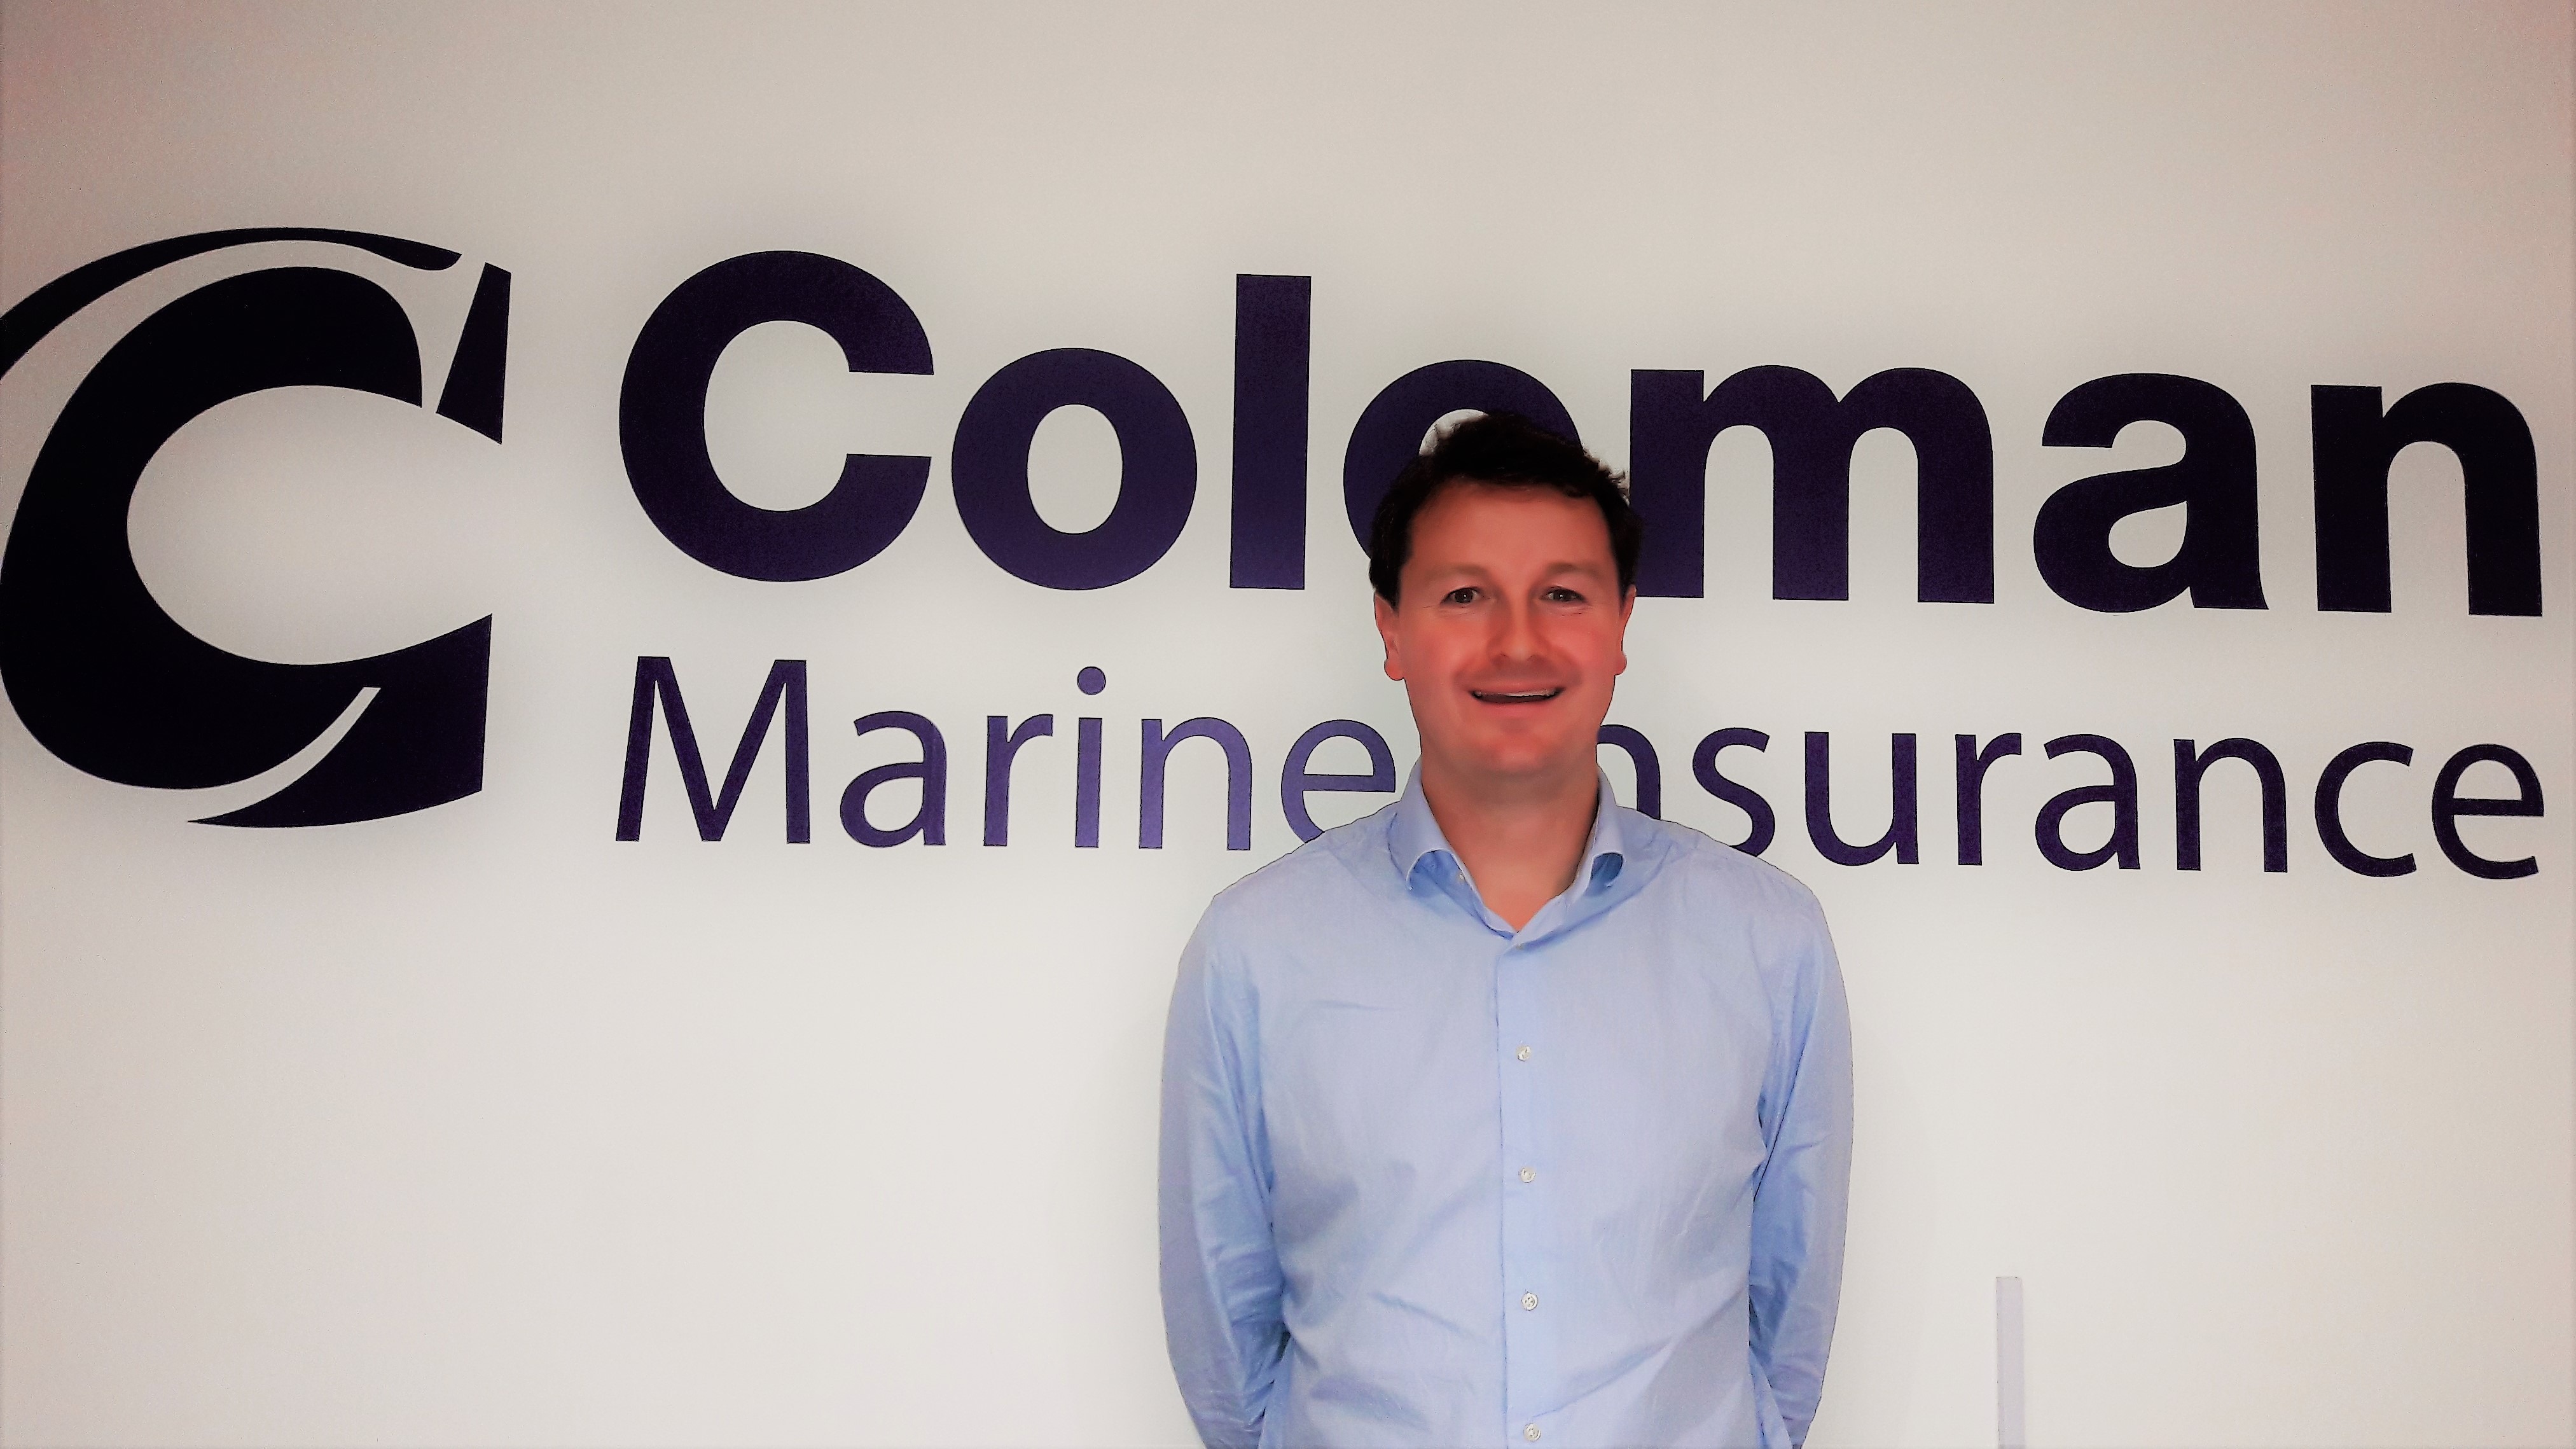 Dean Shaw welcomed to Coleman Marine Insurance team